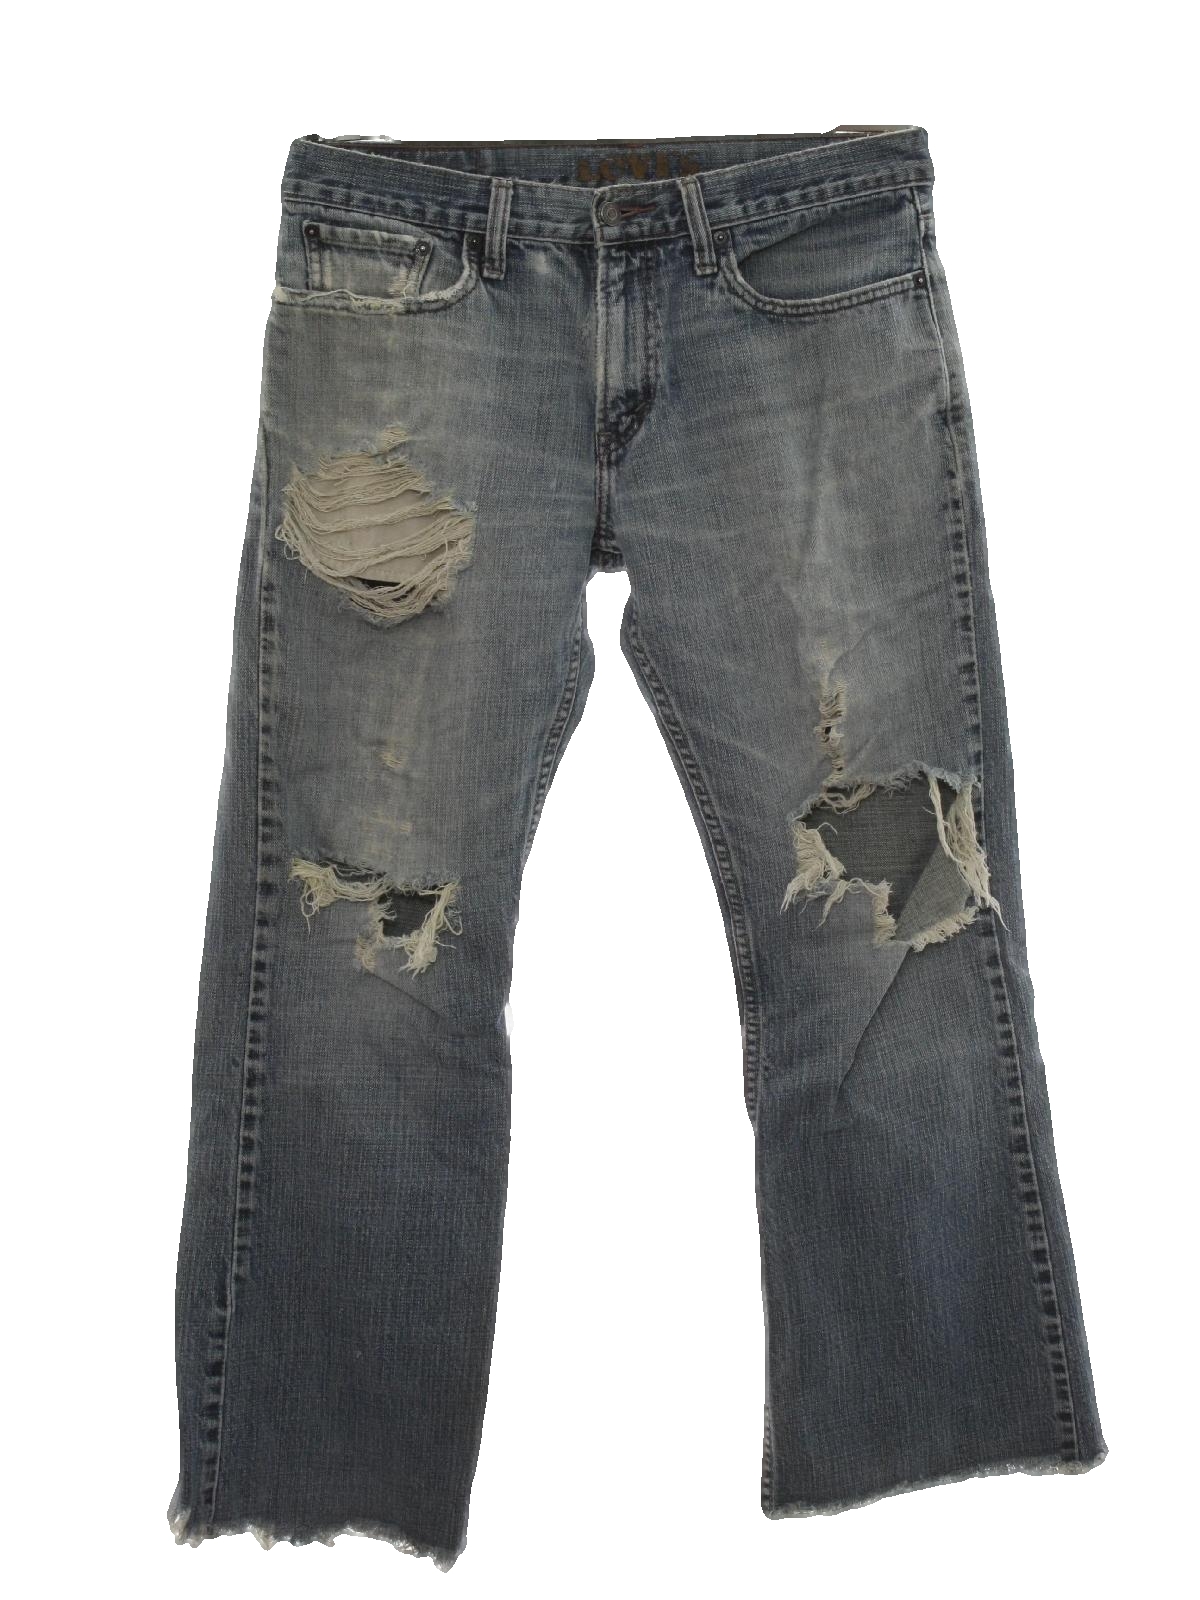 90's Levis Shorts: 90s or Newer -Levis- 527- Mens grunge stone washed ...